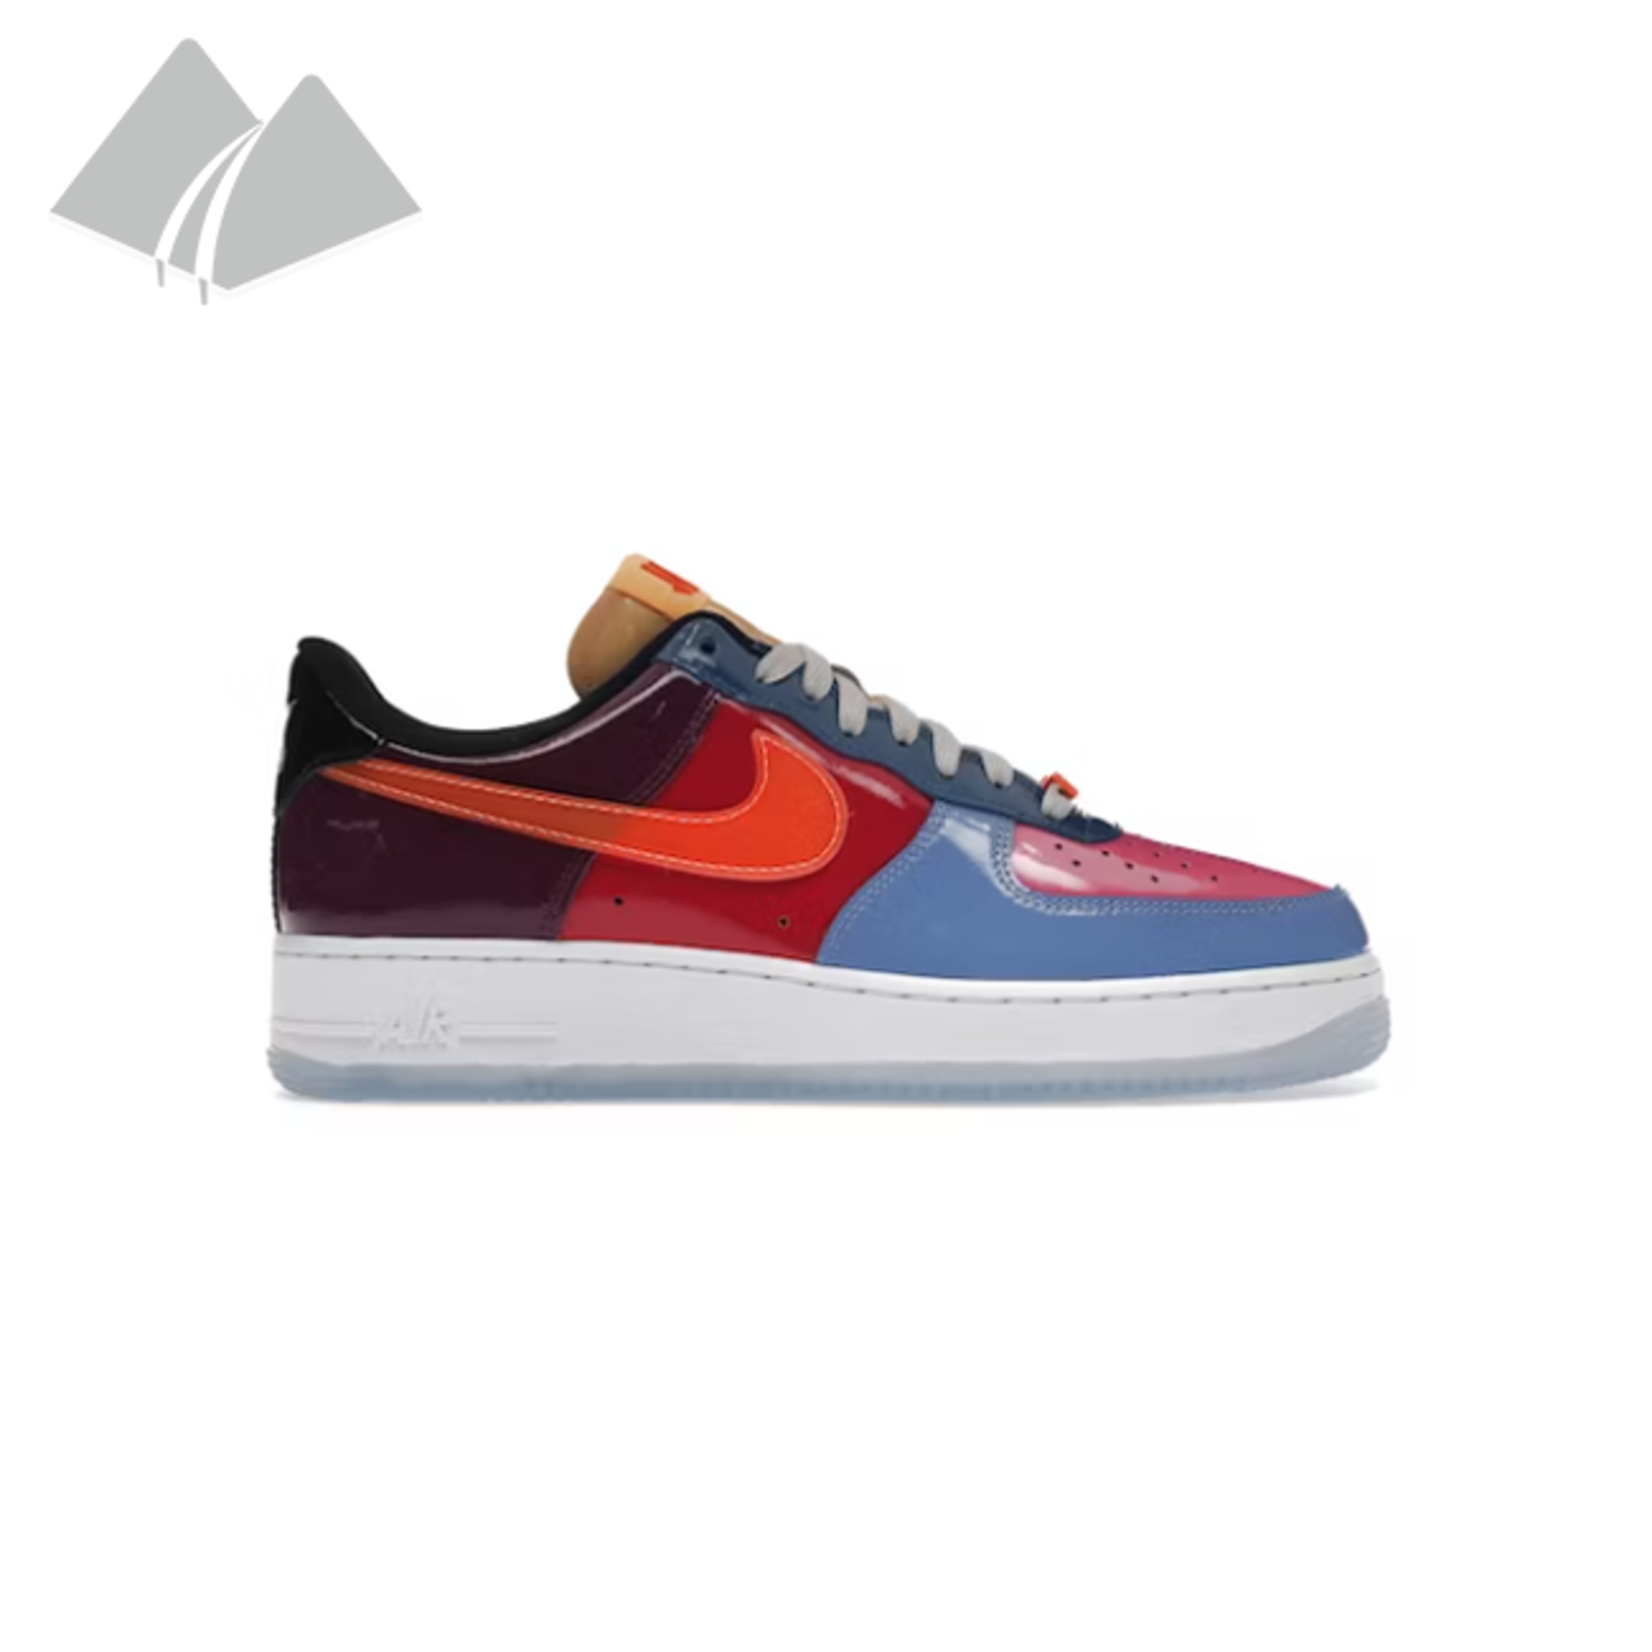 Nike Nike Air Force 1 Low (M) Undefeated Multi-Patent Total Orange